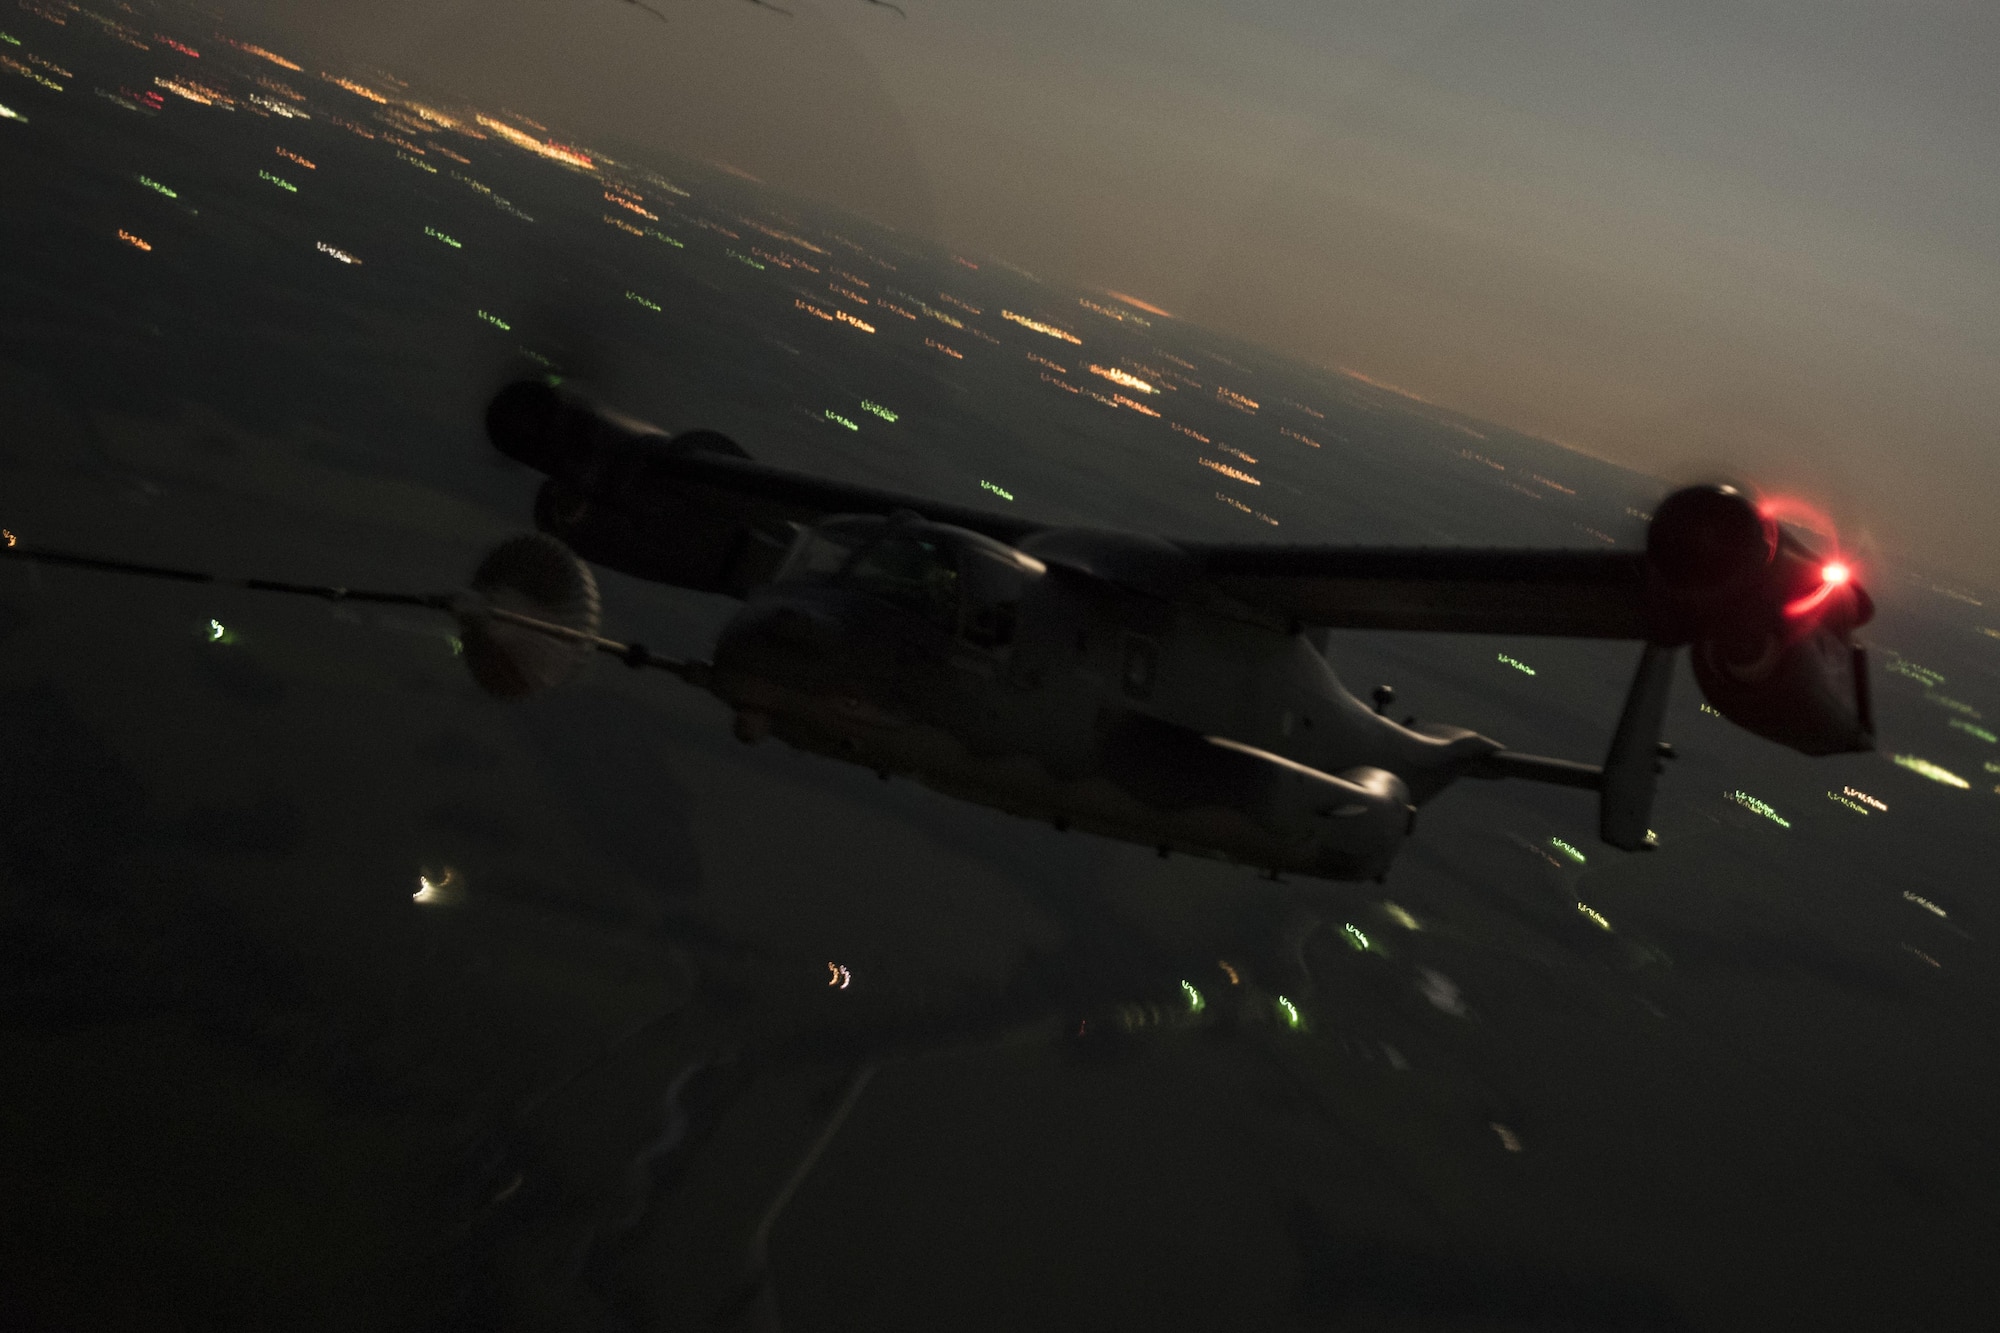 An 8th Special Operations Squadron CV-22 Osprey tiltrotor aircraft receives fuel from a 15th SOS MC-130H Combat Talon II during a total force exercise night-time aerial refueling mission over Louisville, KY., July 9, 2017. Units from the 1st Special Operations Wing conduct quarterly exercises with other units and services to increase consistency in tactics and procedures, ensuring their global readiness. (U.S. Air Force photo by Tech. Sgt. Jeffrey Curtin)